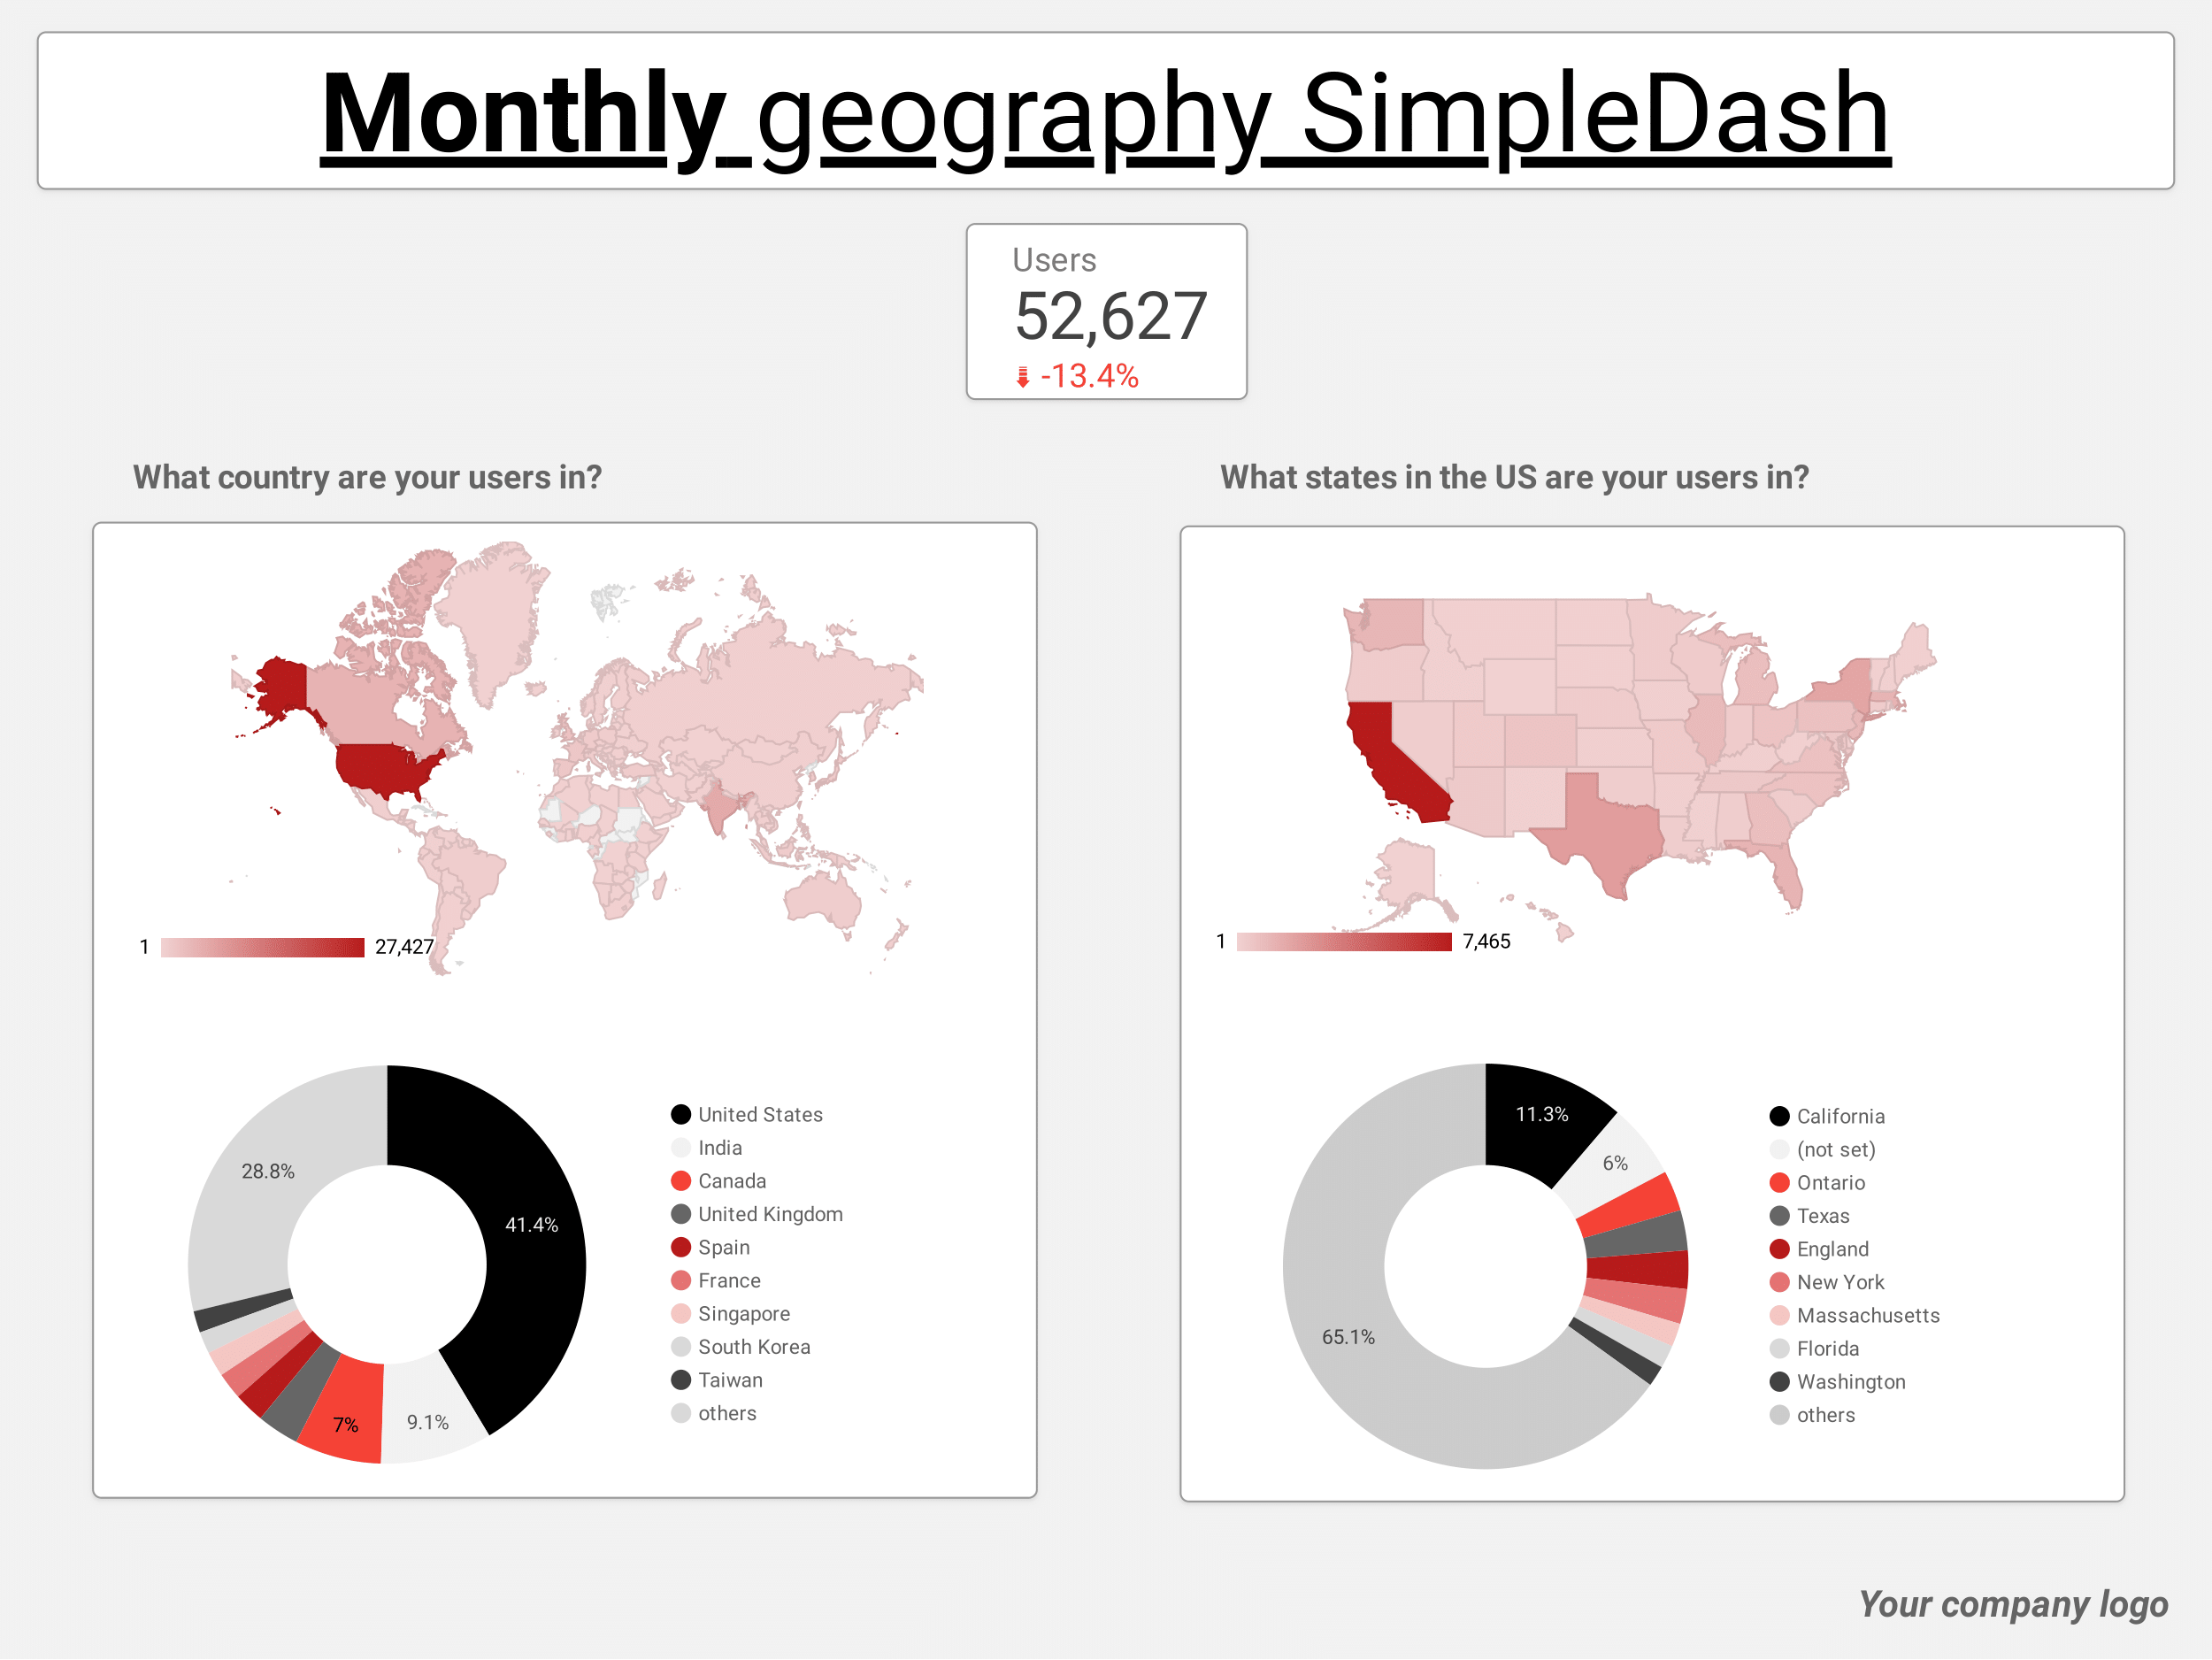 DST_E-commerce_SimpleDash_monthly_geography-1.png